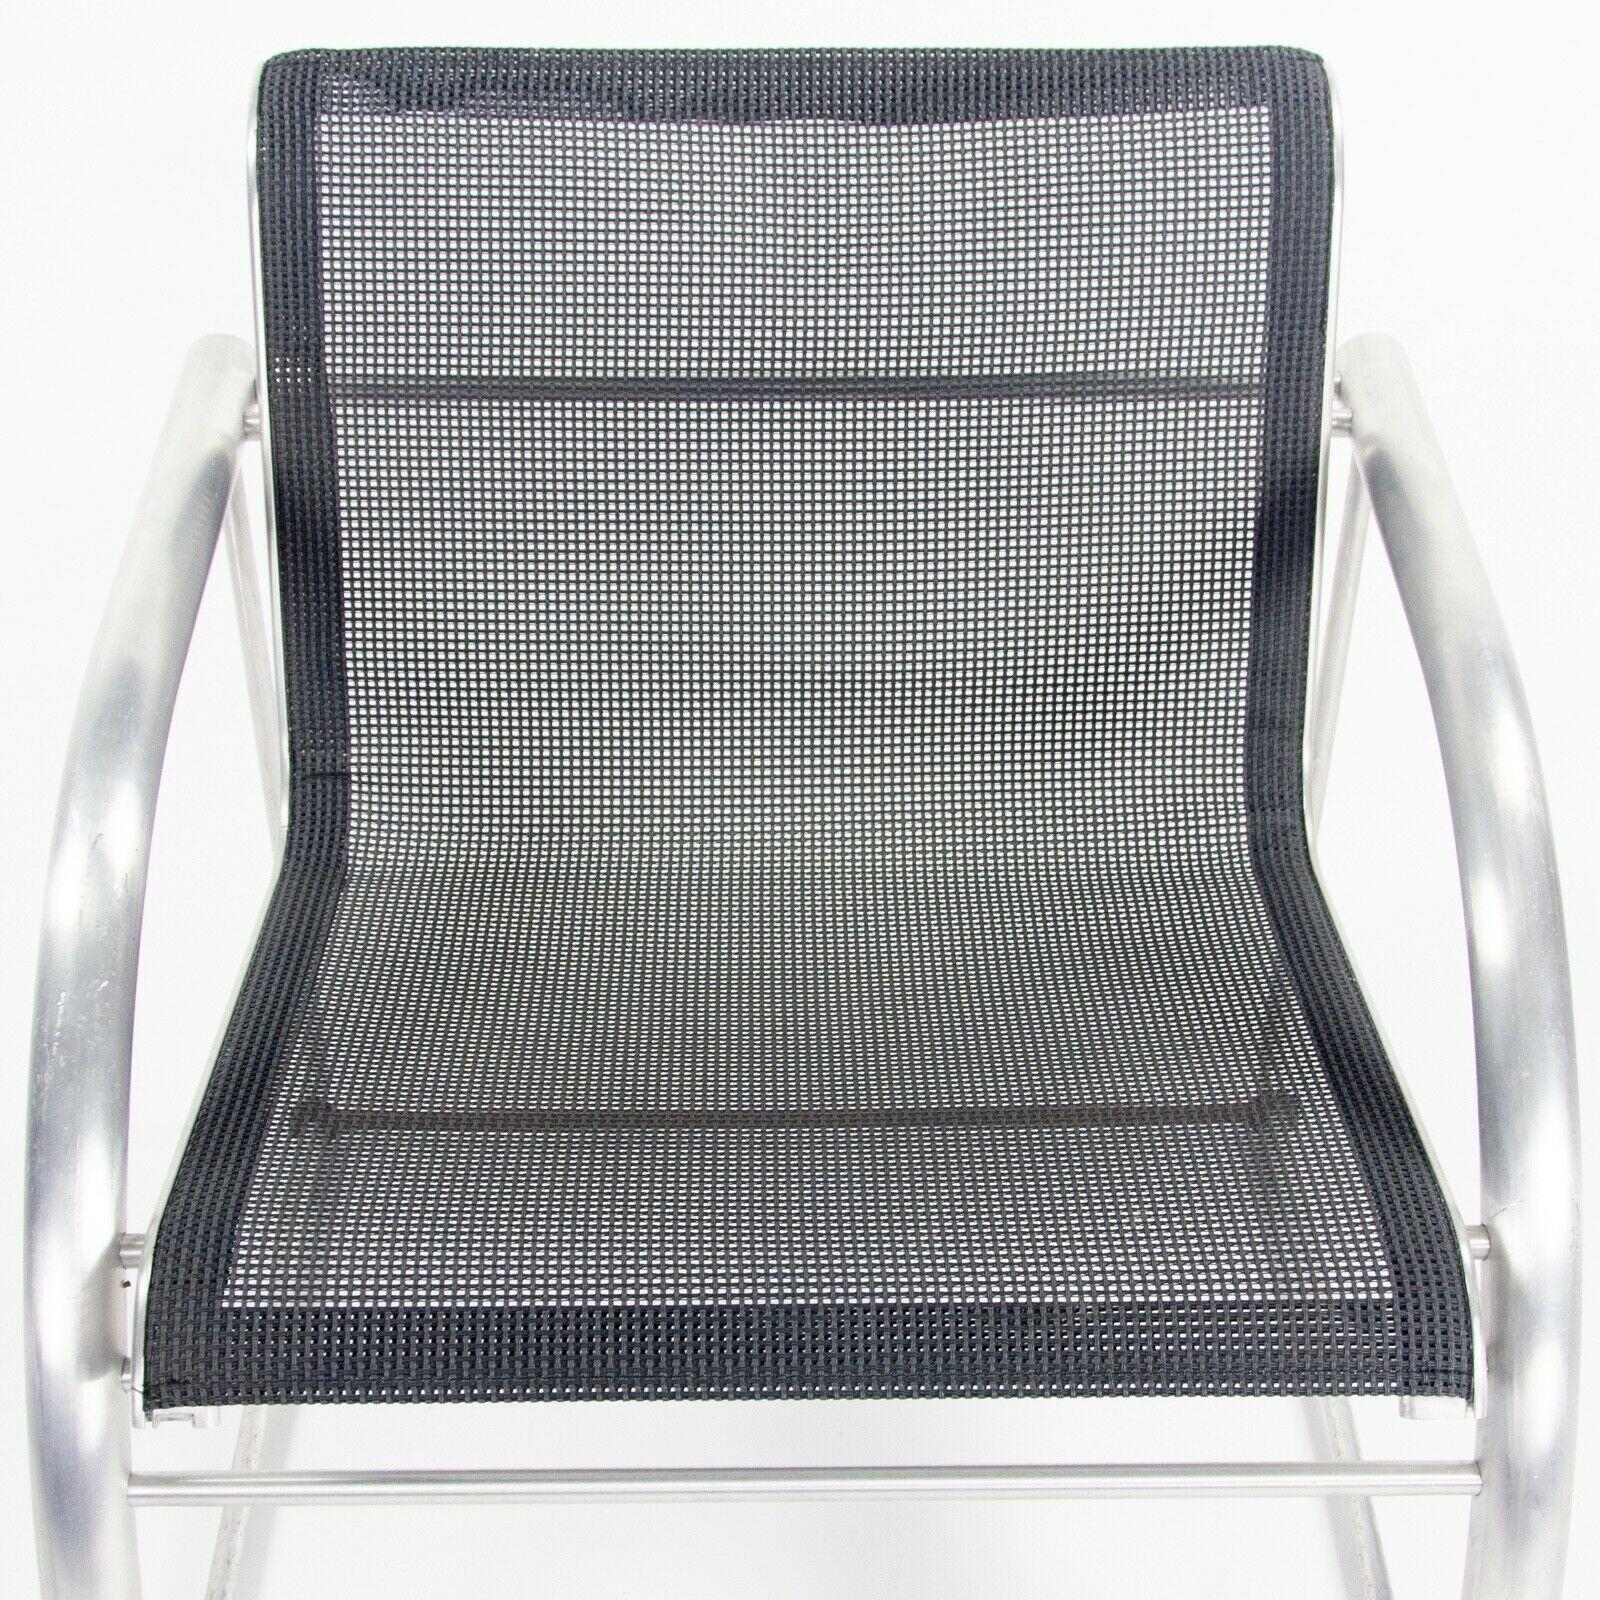 2011 Prototype Richard Schultz Mateo Collection Raw Aluminum & Mesh Dining Chair For Sale 5